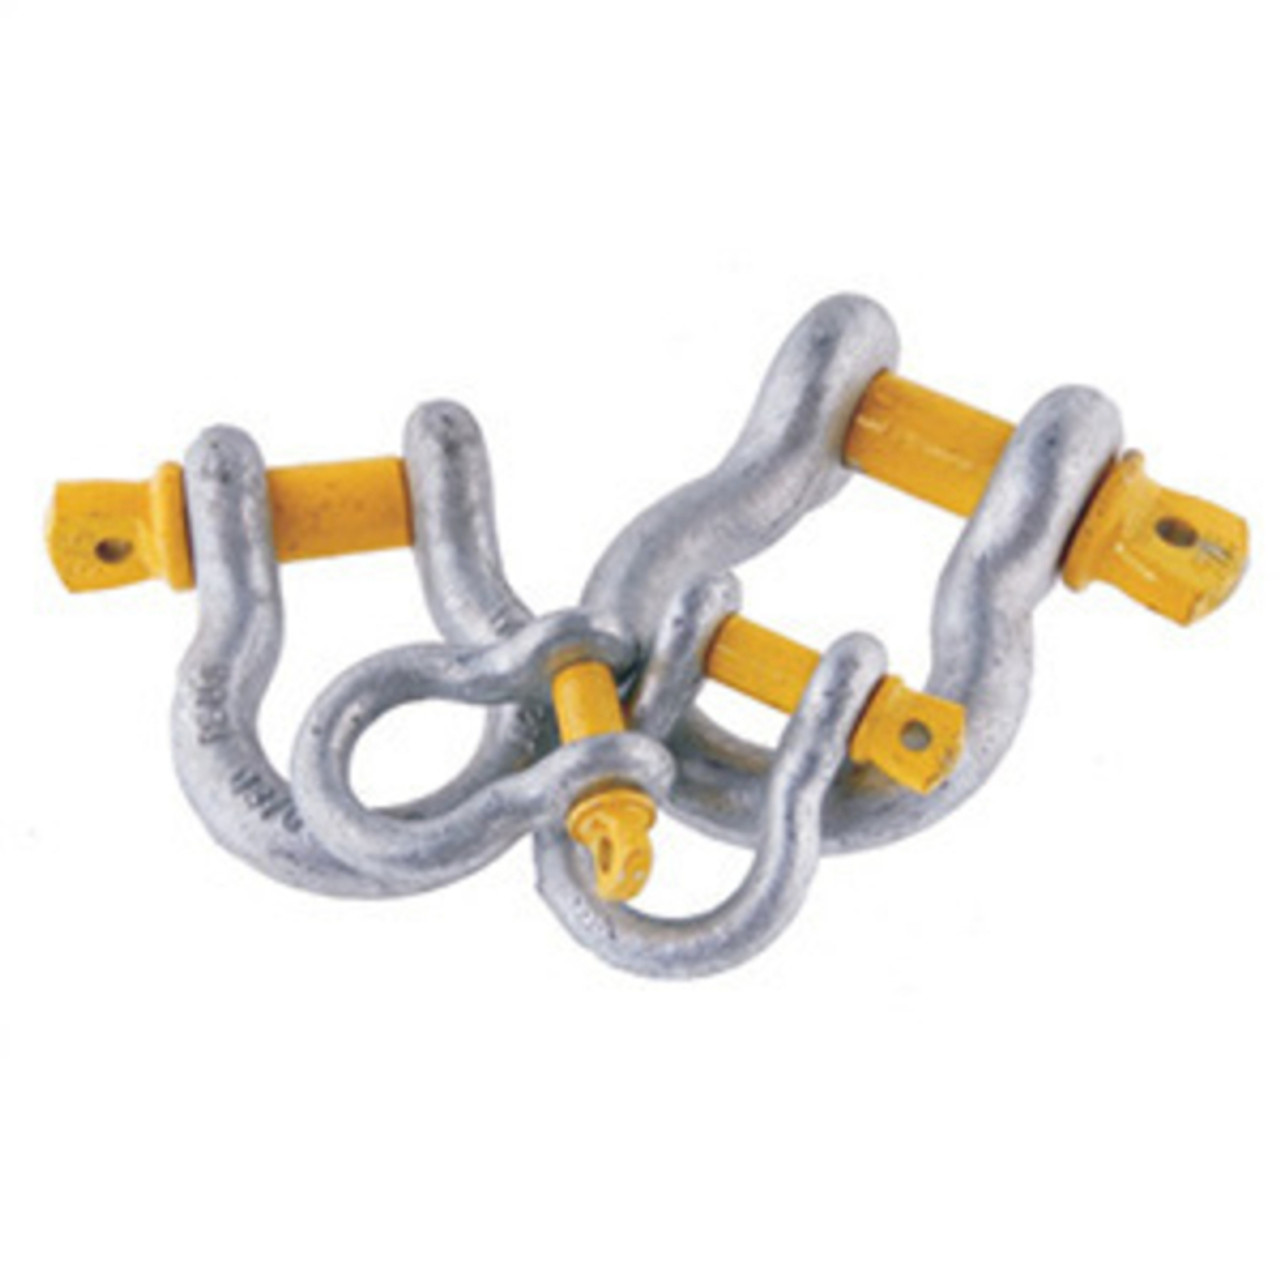 Rated Bow Shackles - 1.5 ton